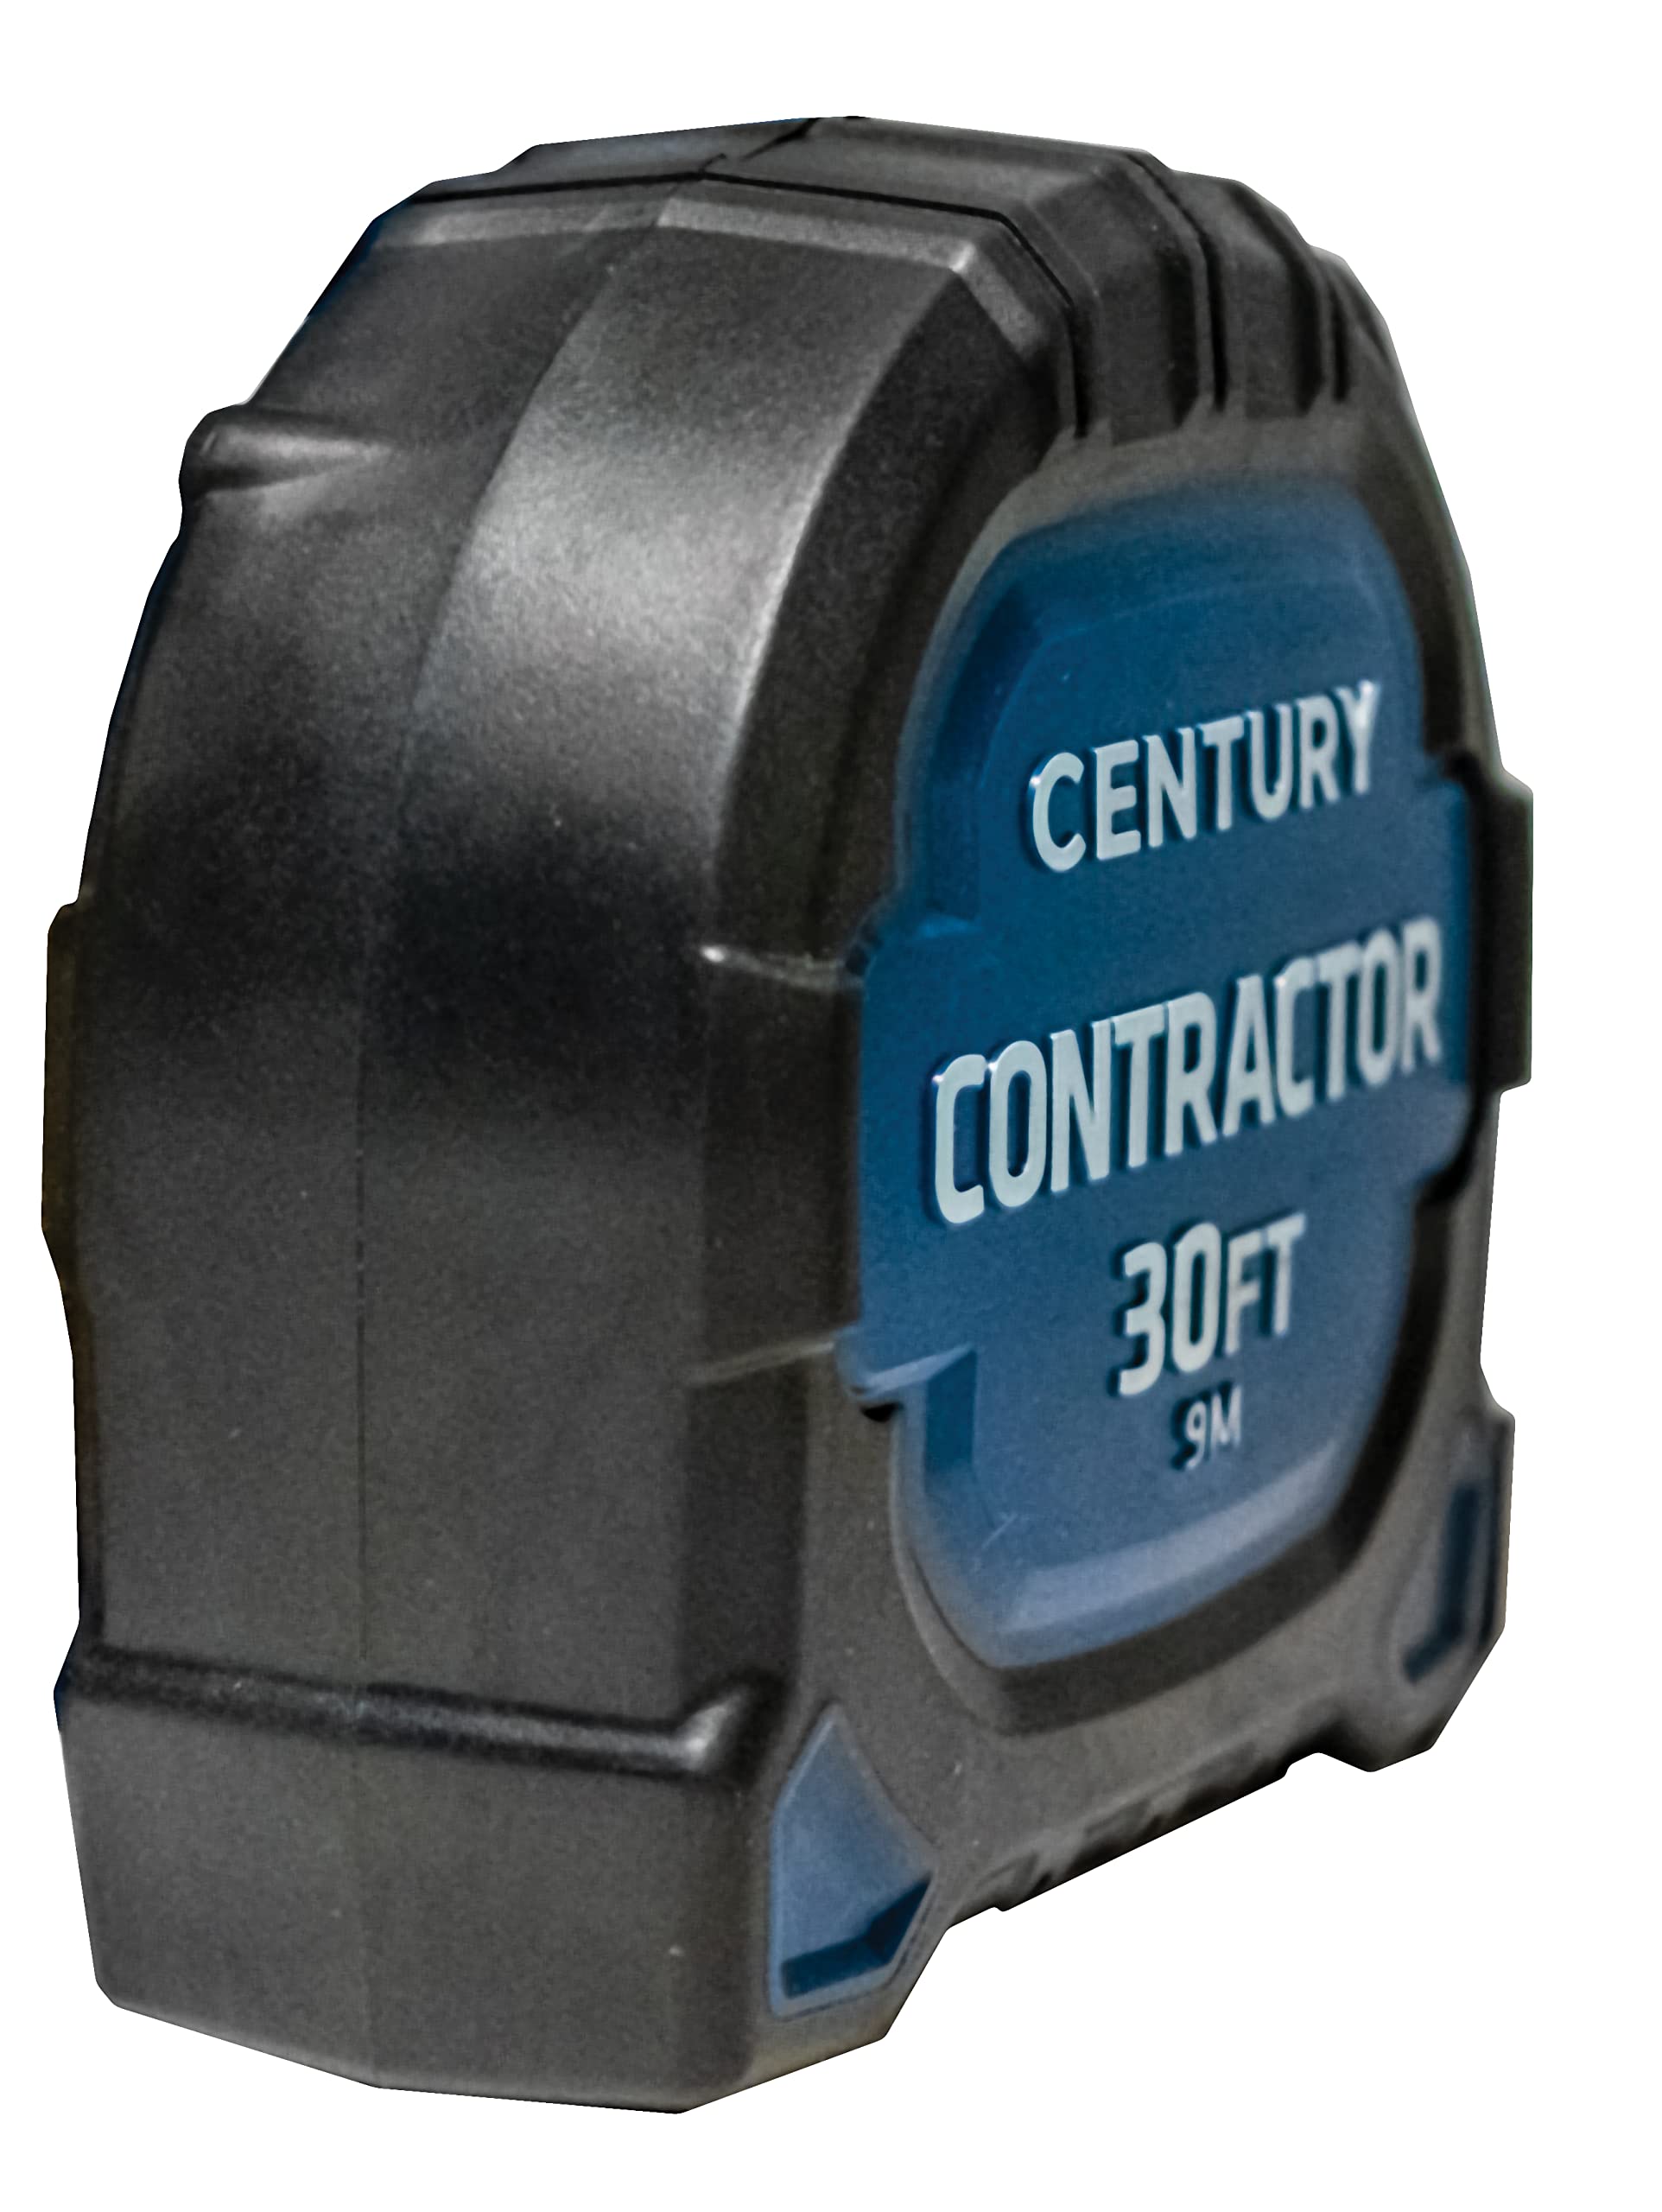 Century Drill & Tool 72843 Contractor Fractional/Metric Tape Measure, 30-Foot